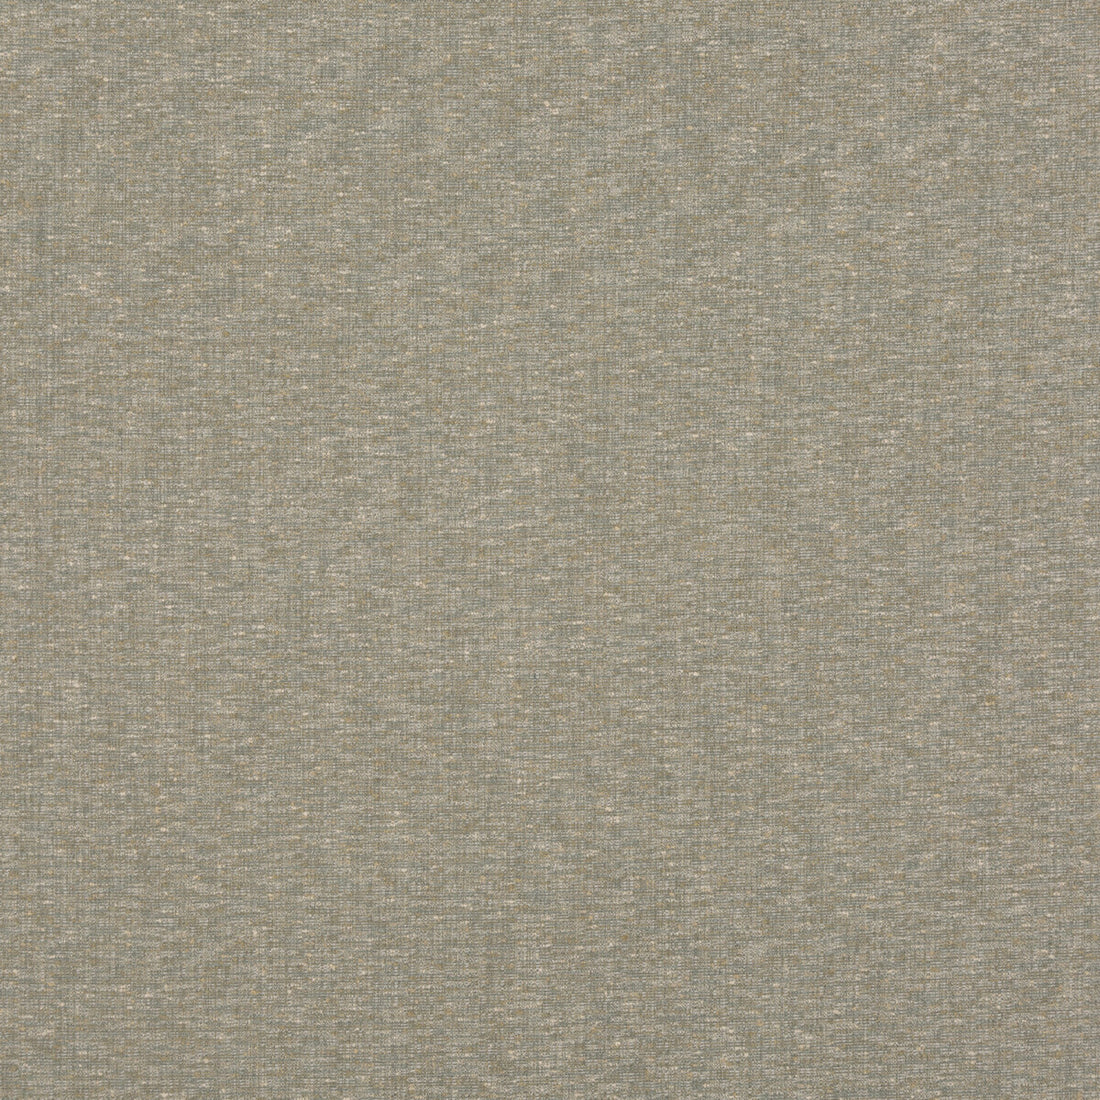 Drift fabric in shingle color - pattern BF10678.915.0 - by G P &amp; J Baker in the Essential Colours collection